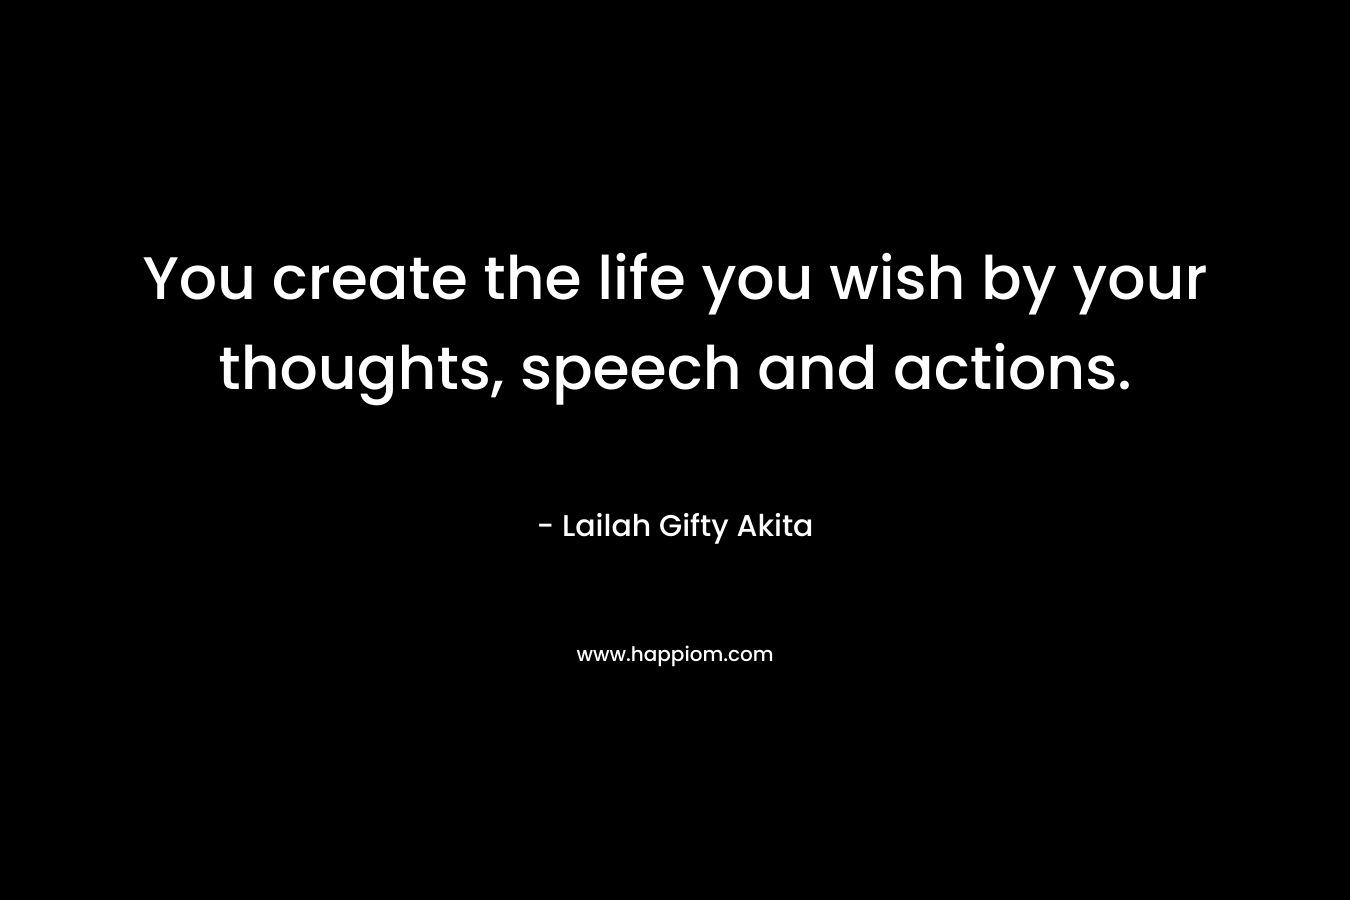 You create the life you wish by your thoughts, speech and actions.